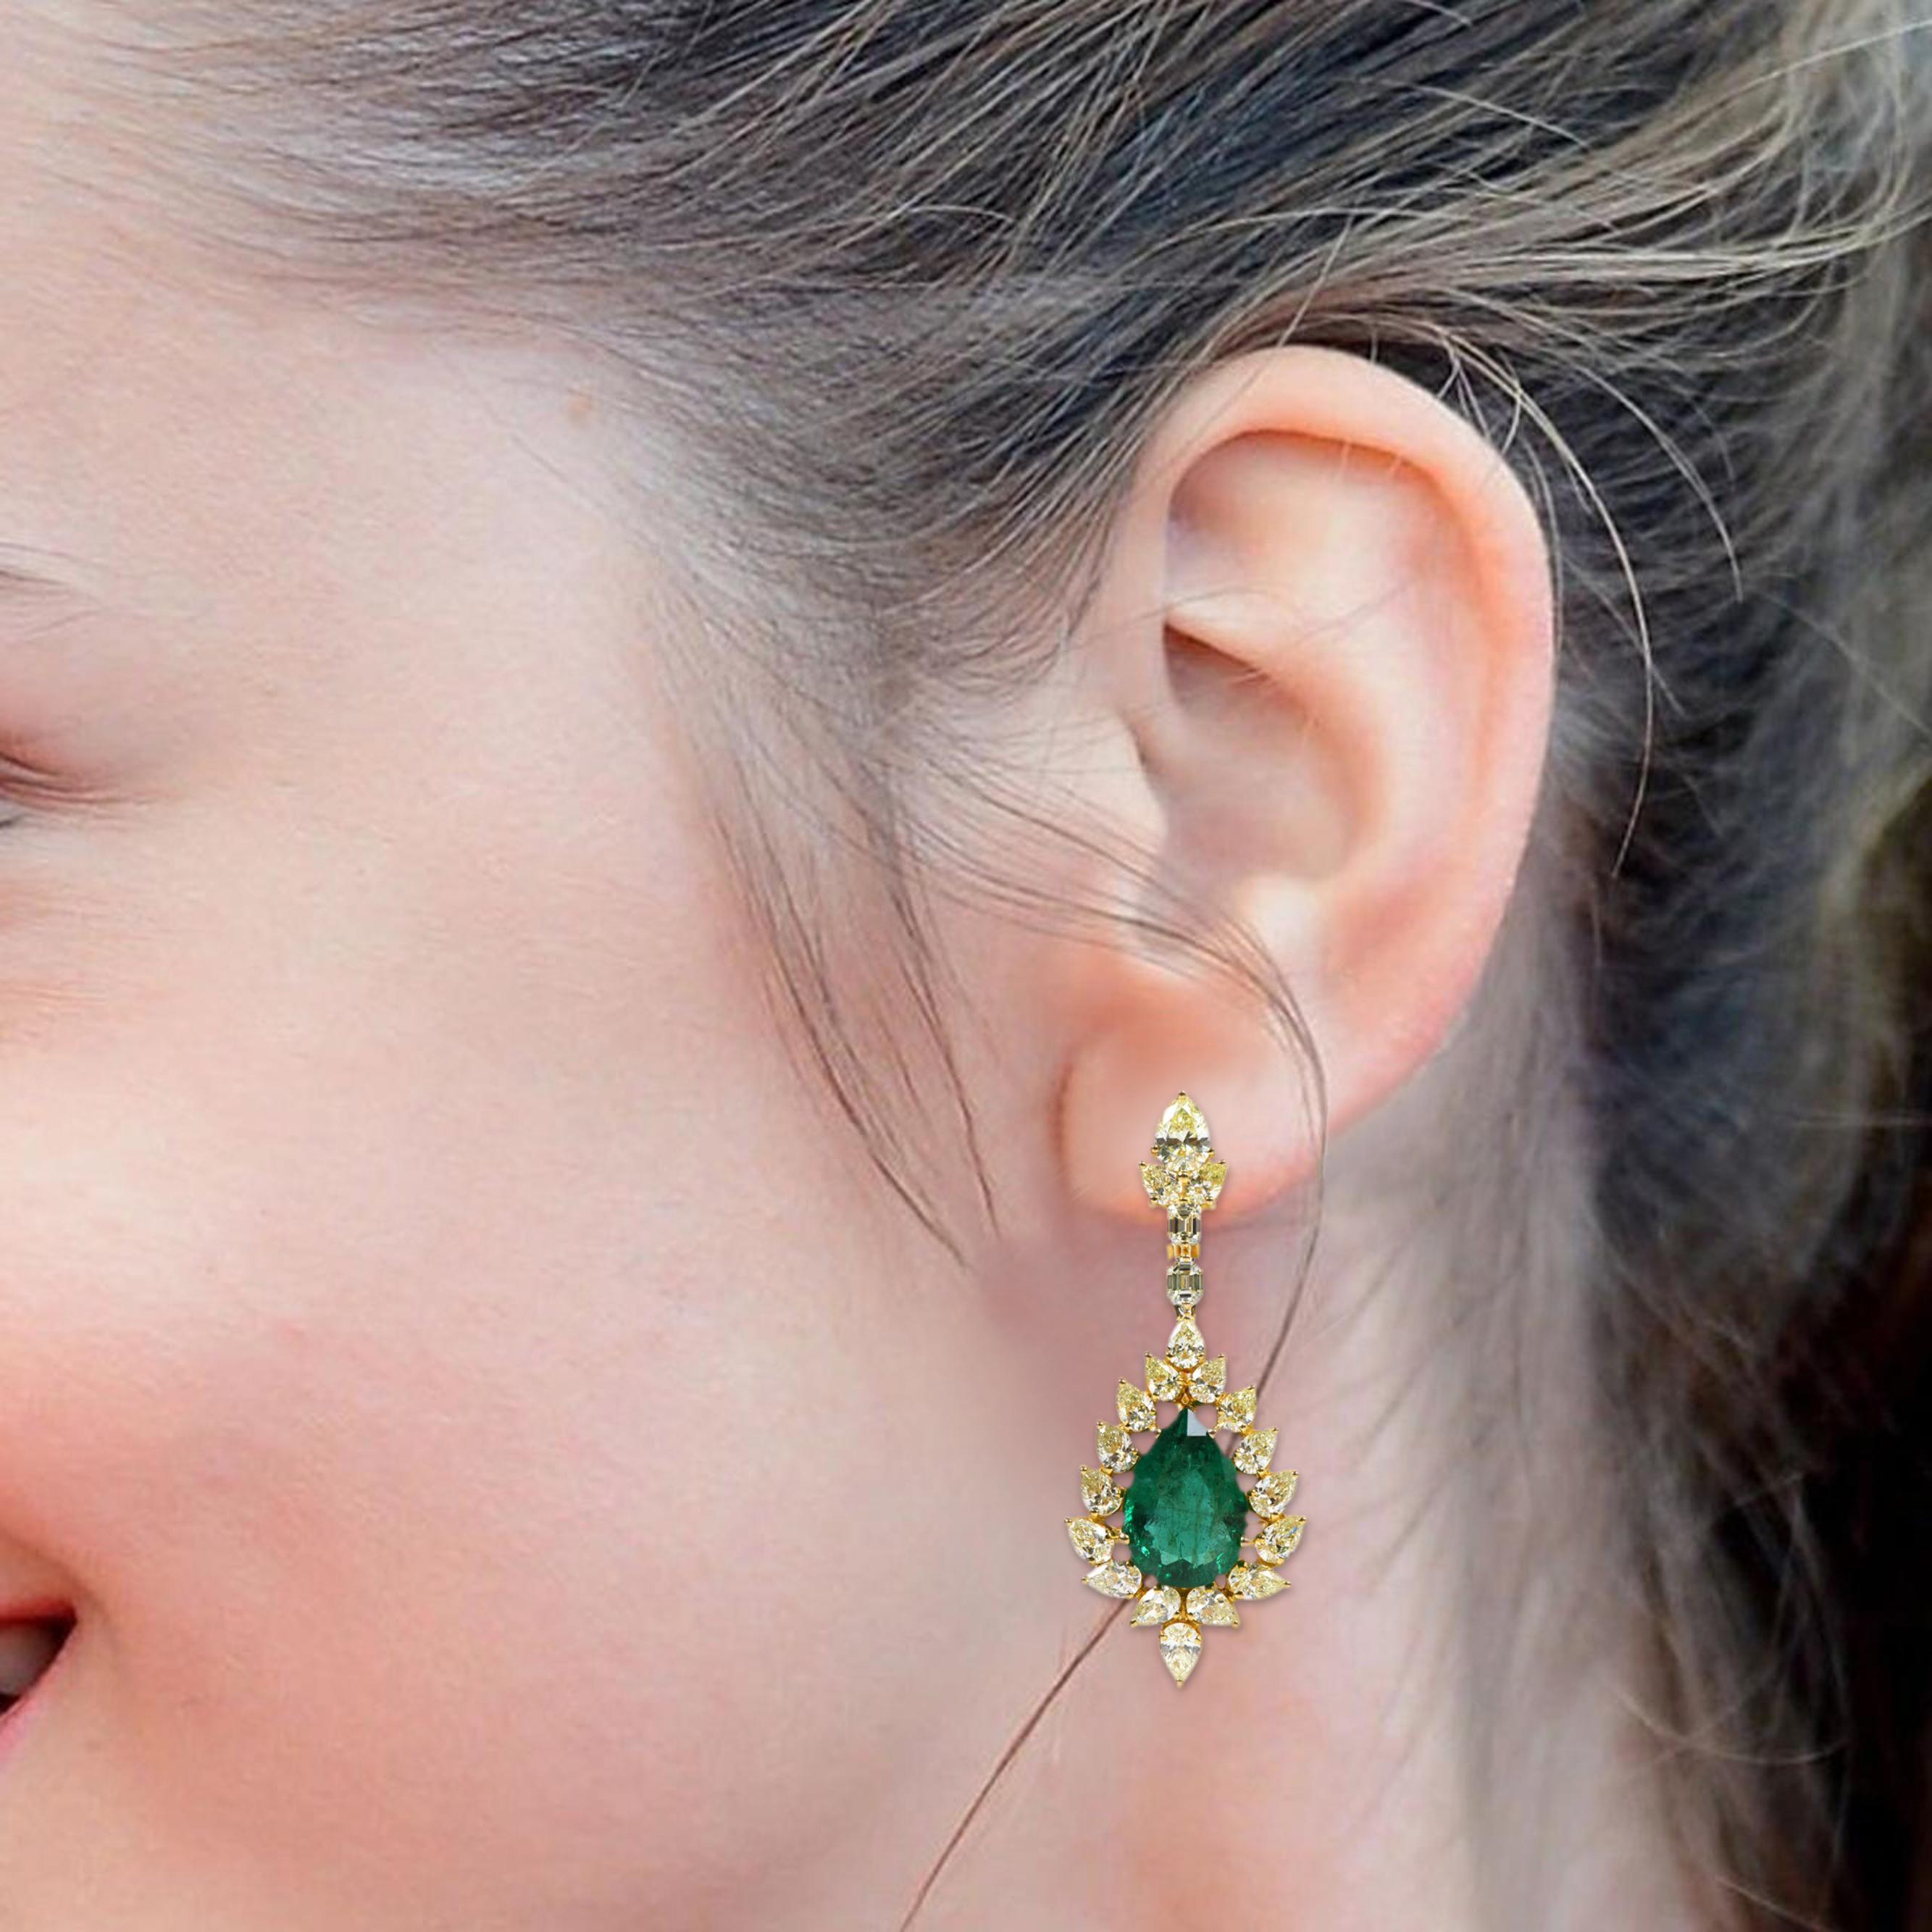 18 Karat Yellow Gold 34.33 Carat Natural Emerald and Yellow Diamond Drop Earrings

These eye-catching, statement drop earrings are a showstopping piece of craft. Featuring pear-shaped yellow diamonds, placed in perfect concinnity and forming a